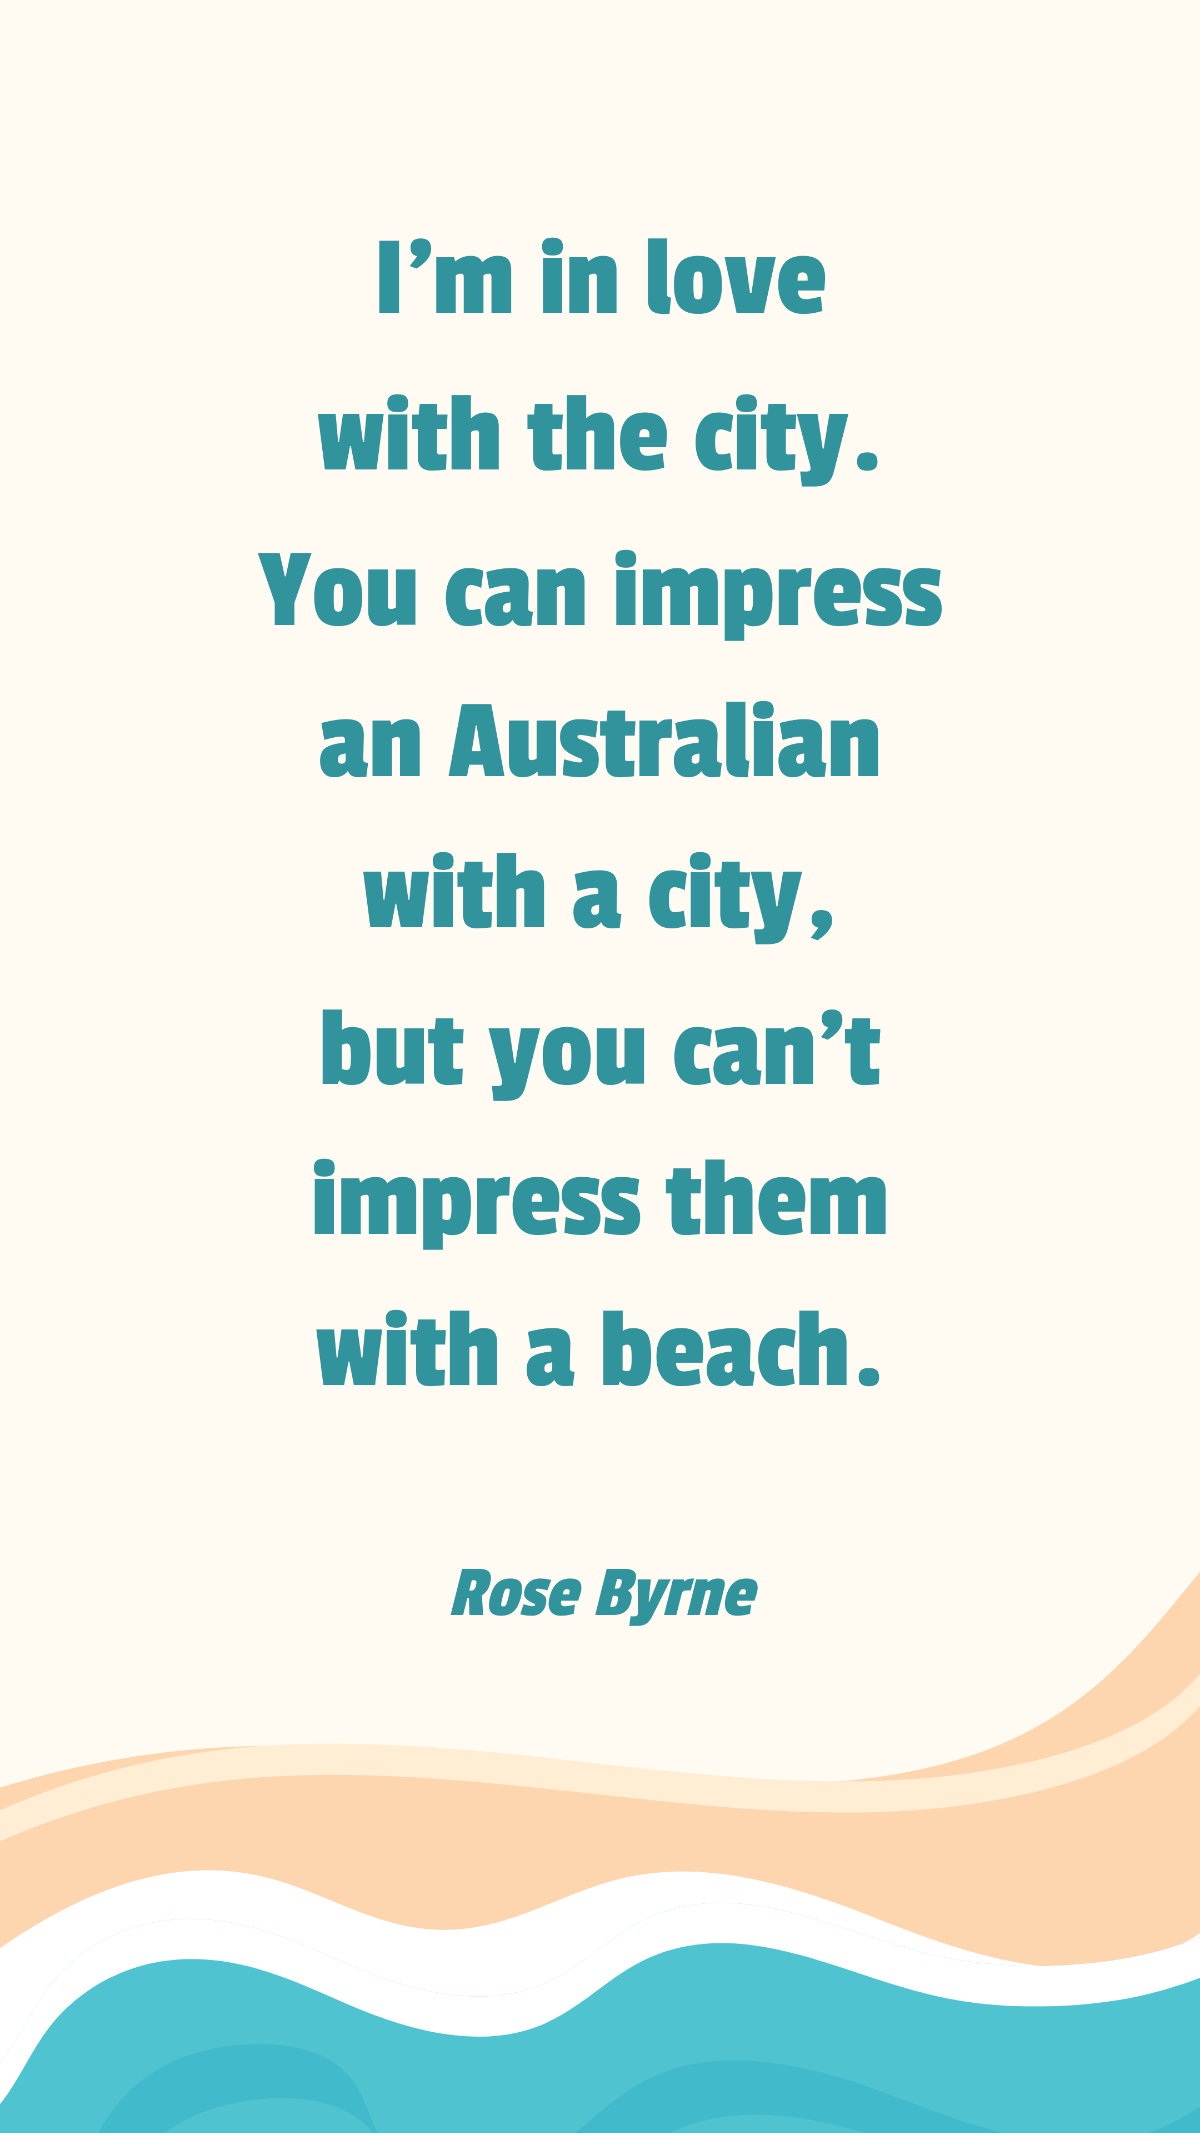 Rose Byrne - I'm in love with the city. You can impress an Australian with a city, but you can't impress them with a beach. Template